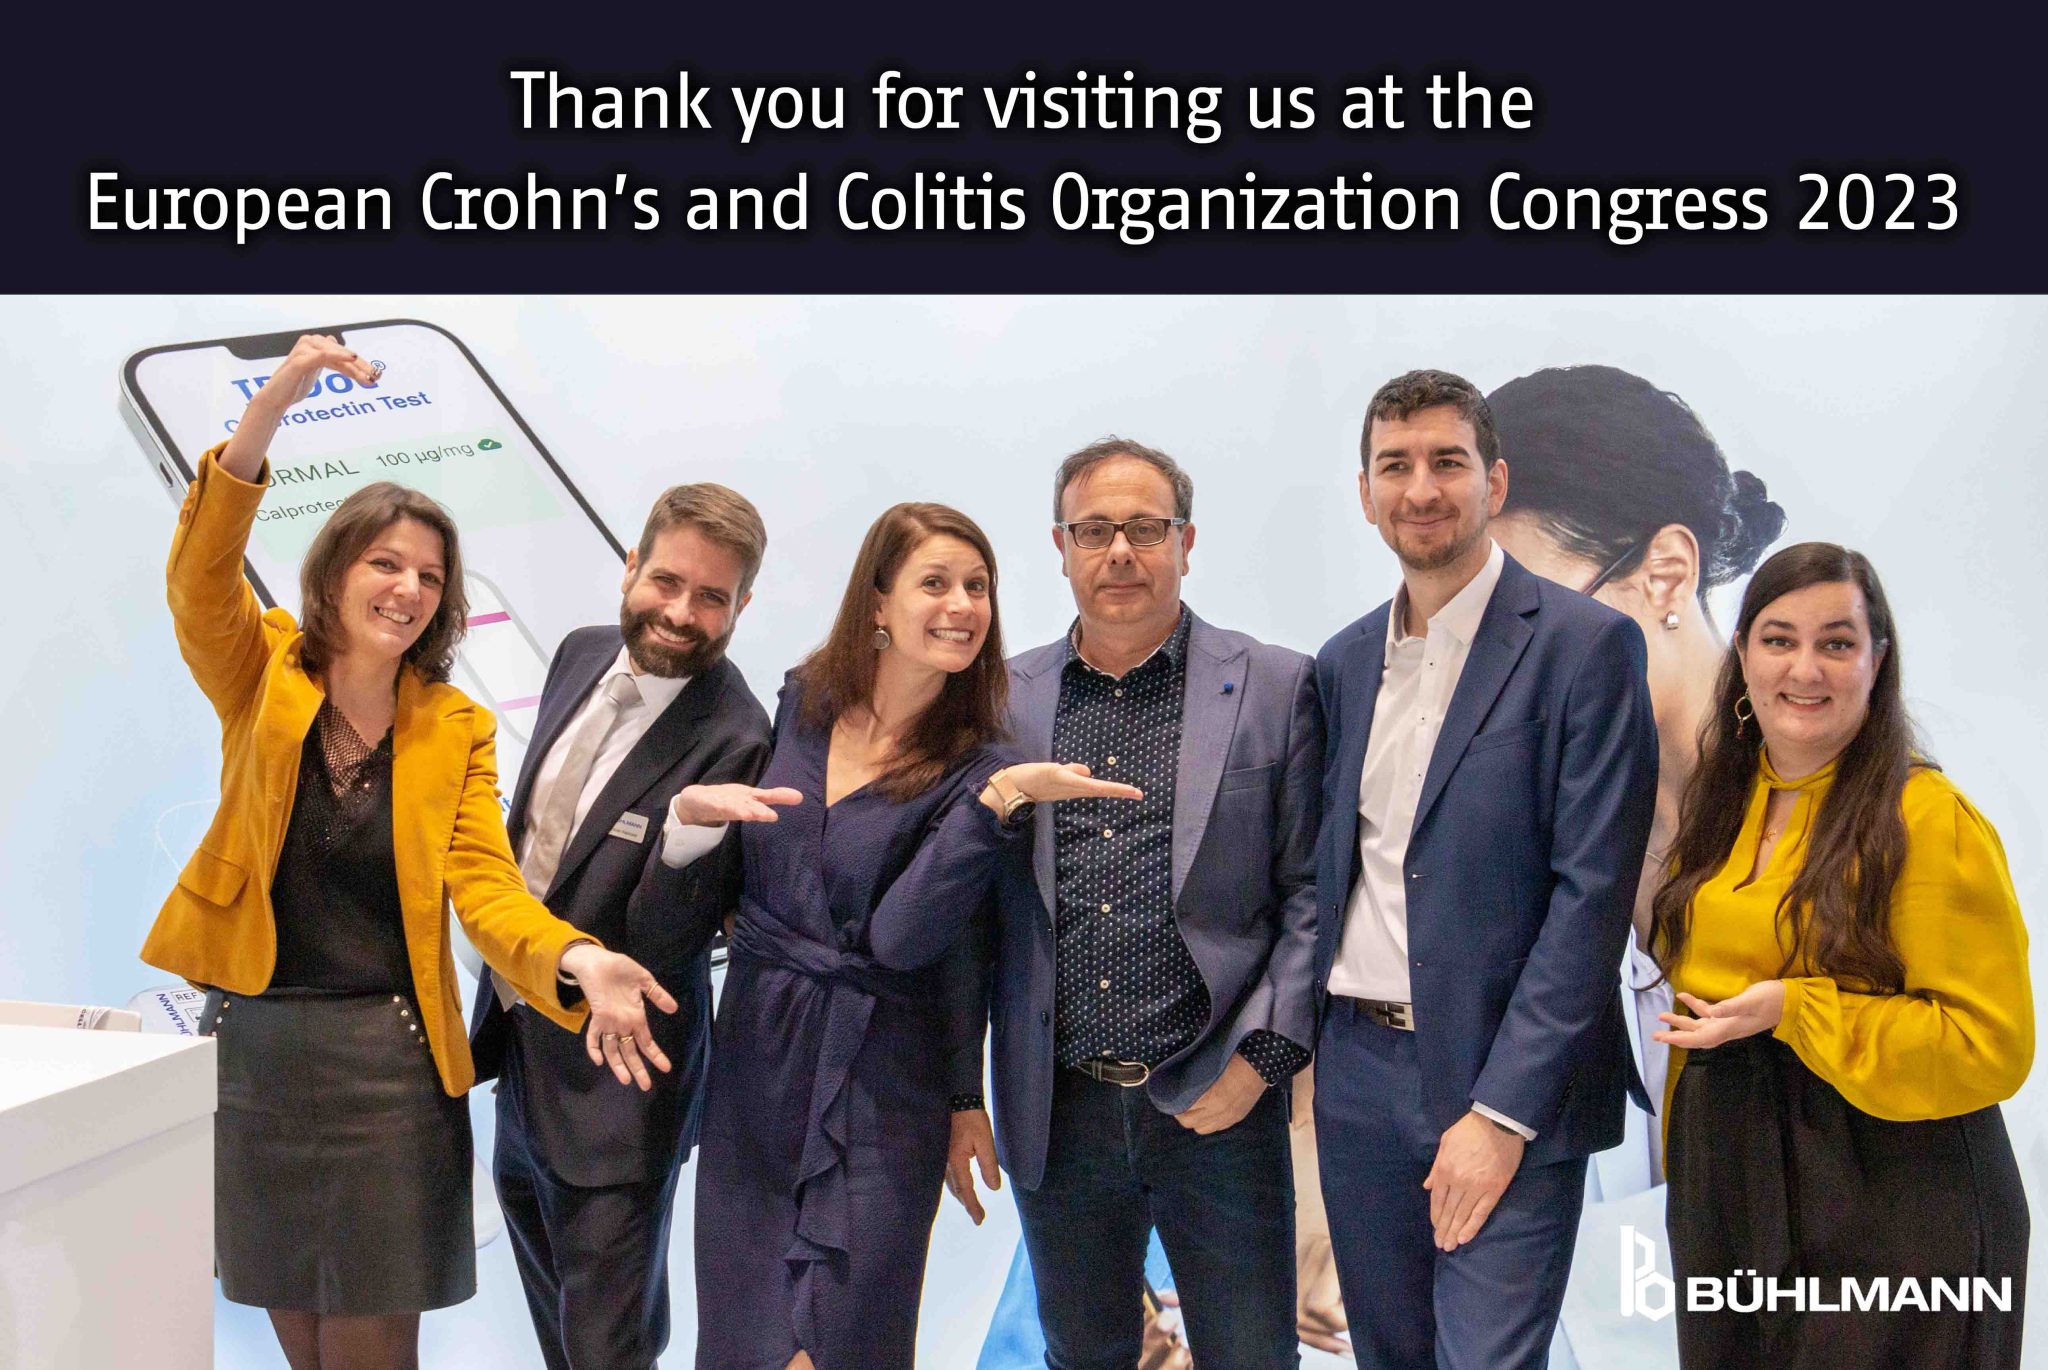 Highlights from ECCO Congress 2023